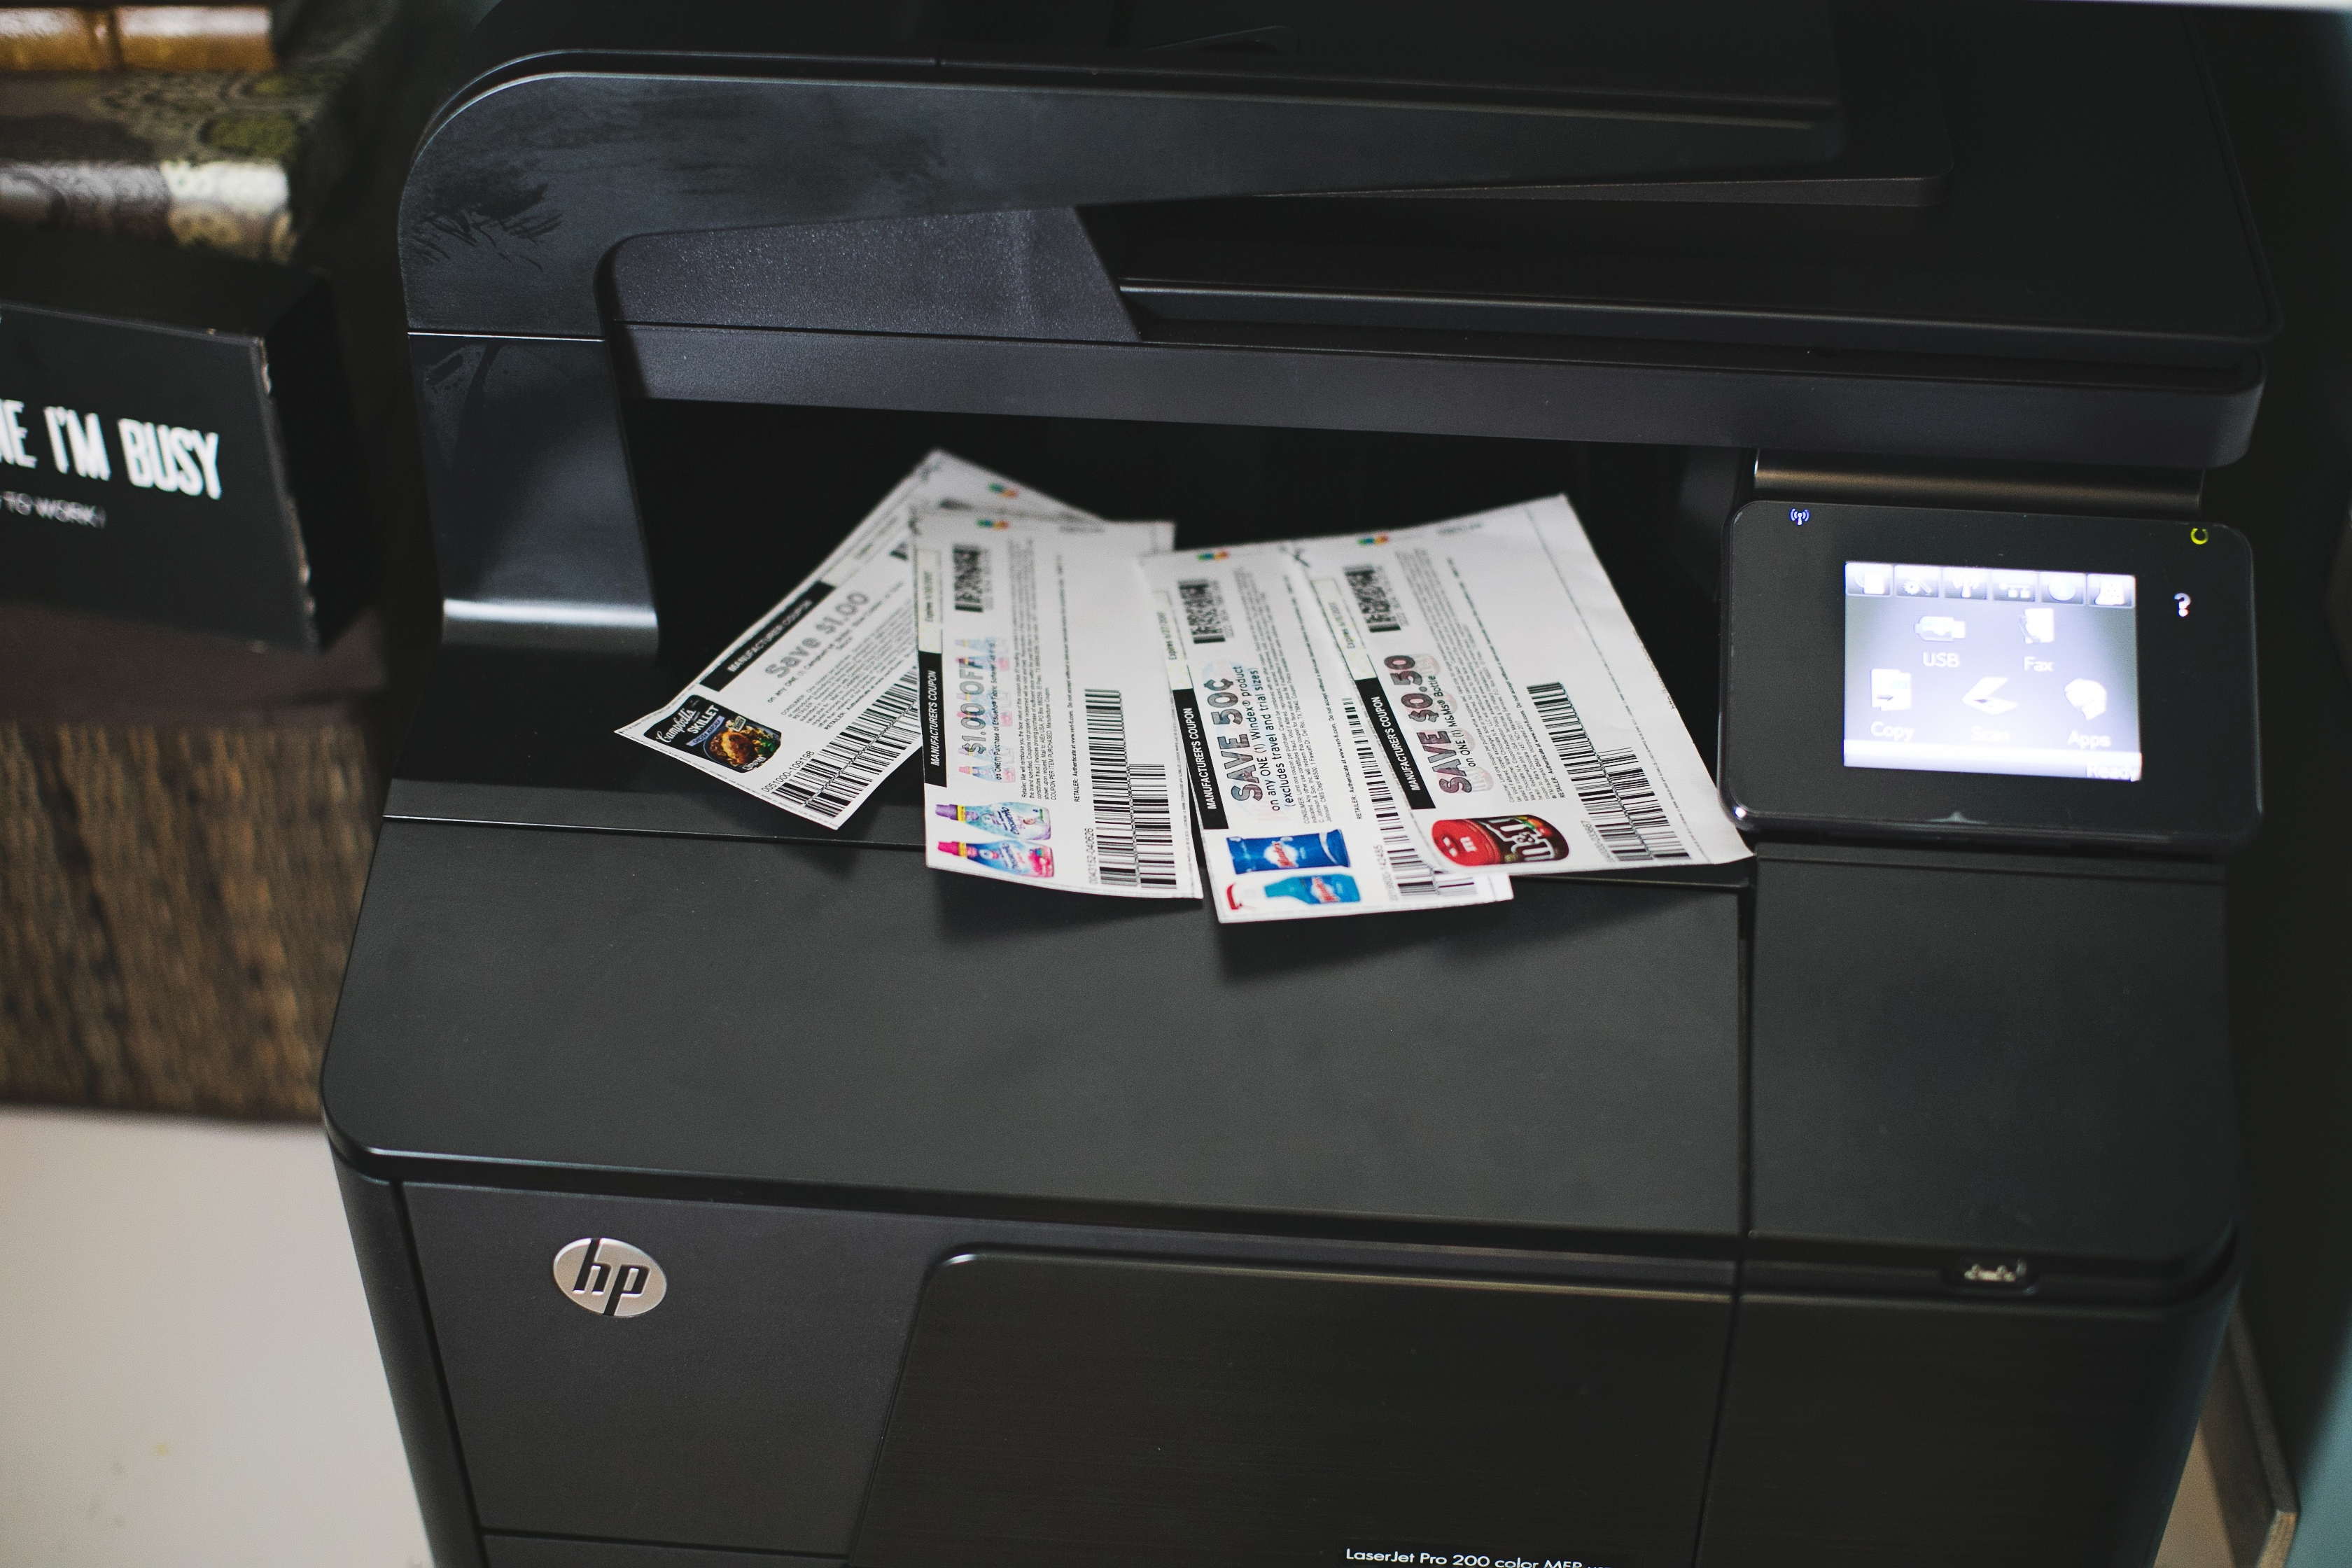 10 ways to save big on printer ink and toner – Buy a laser printer like this one